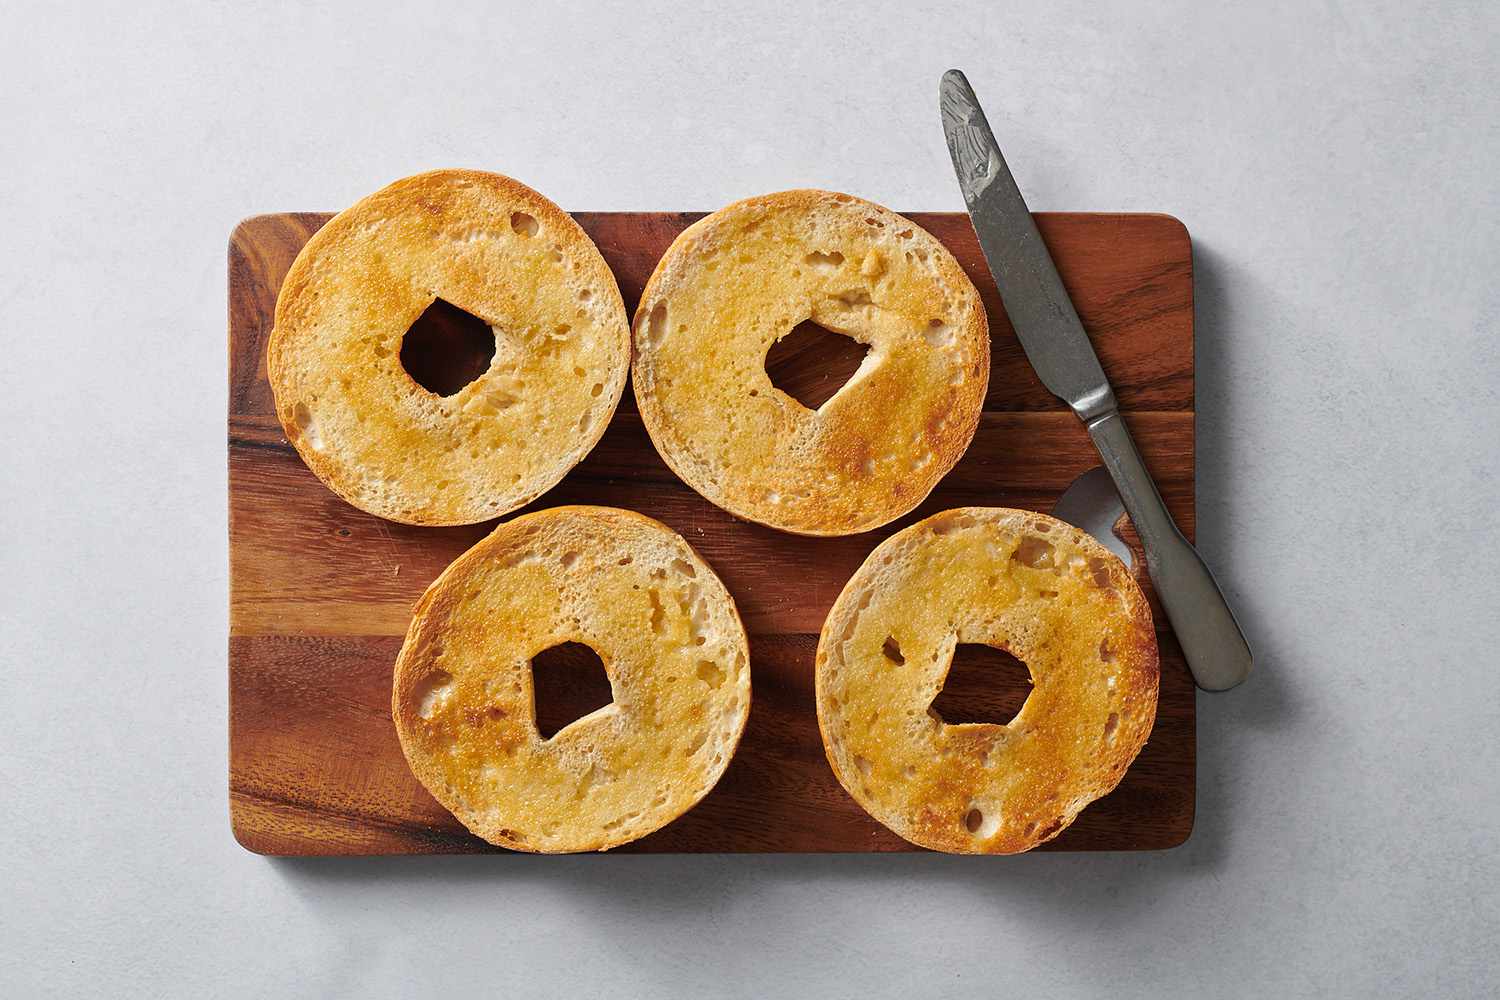 toasted bagel slices on a wood cutting board